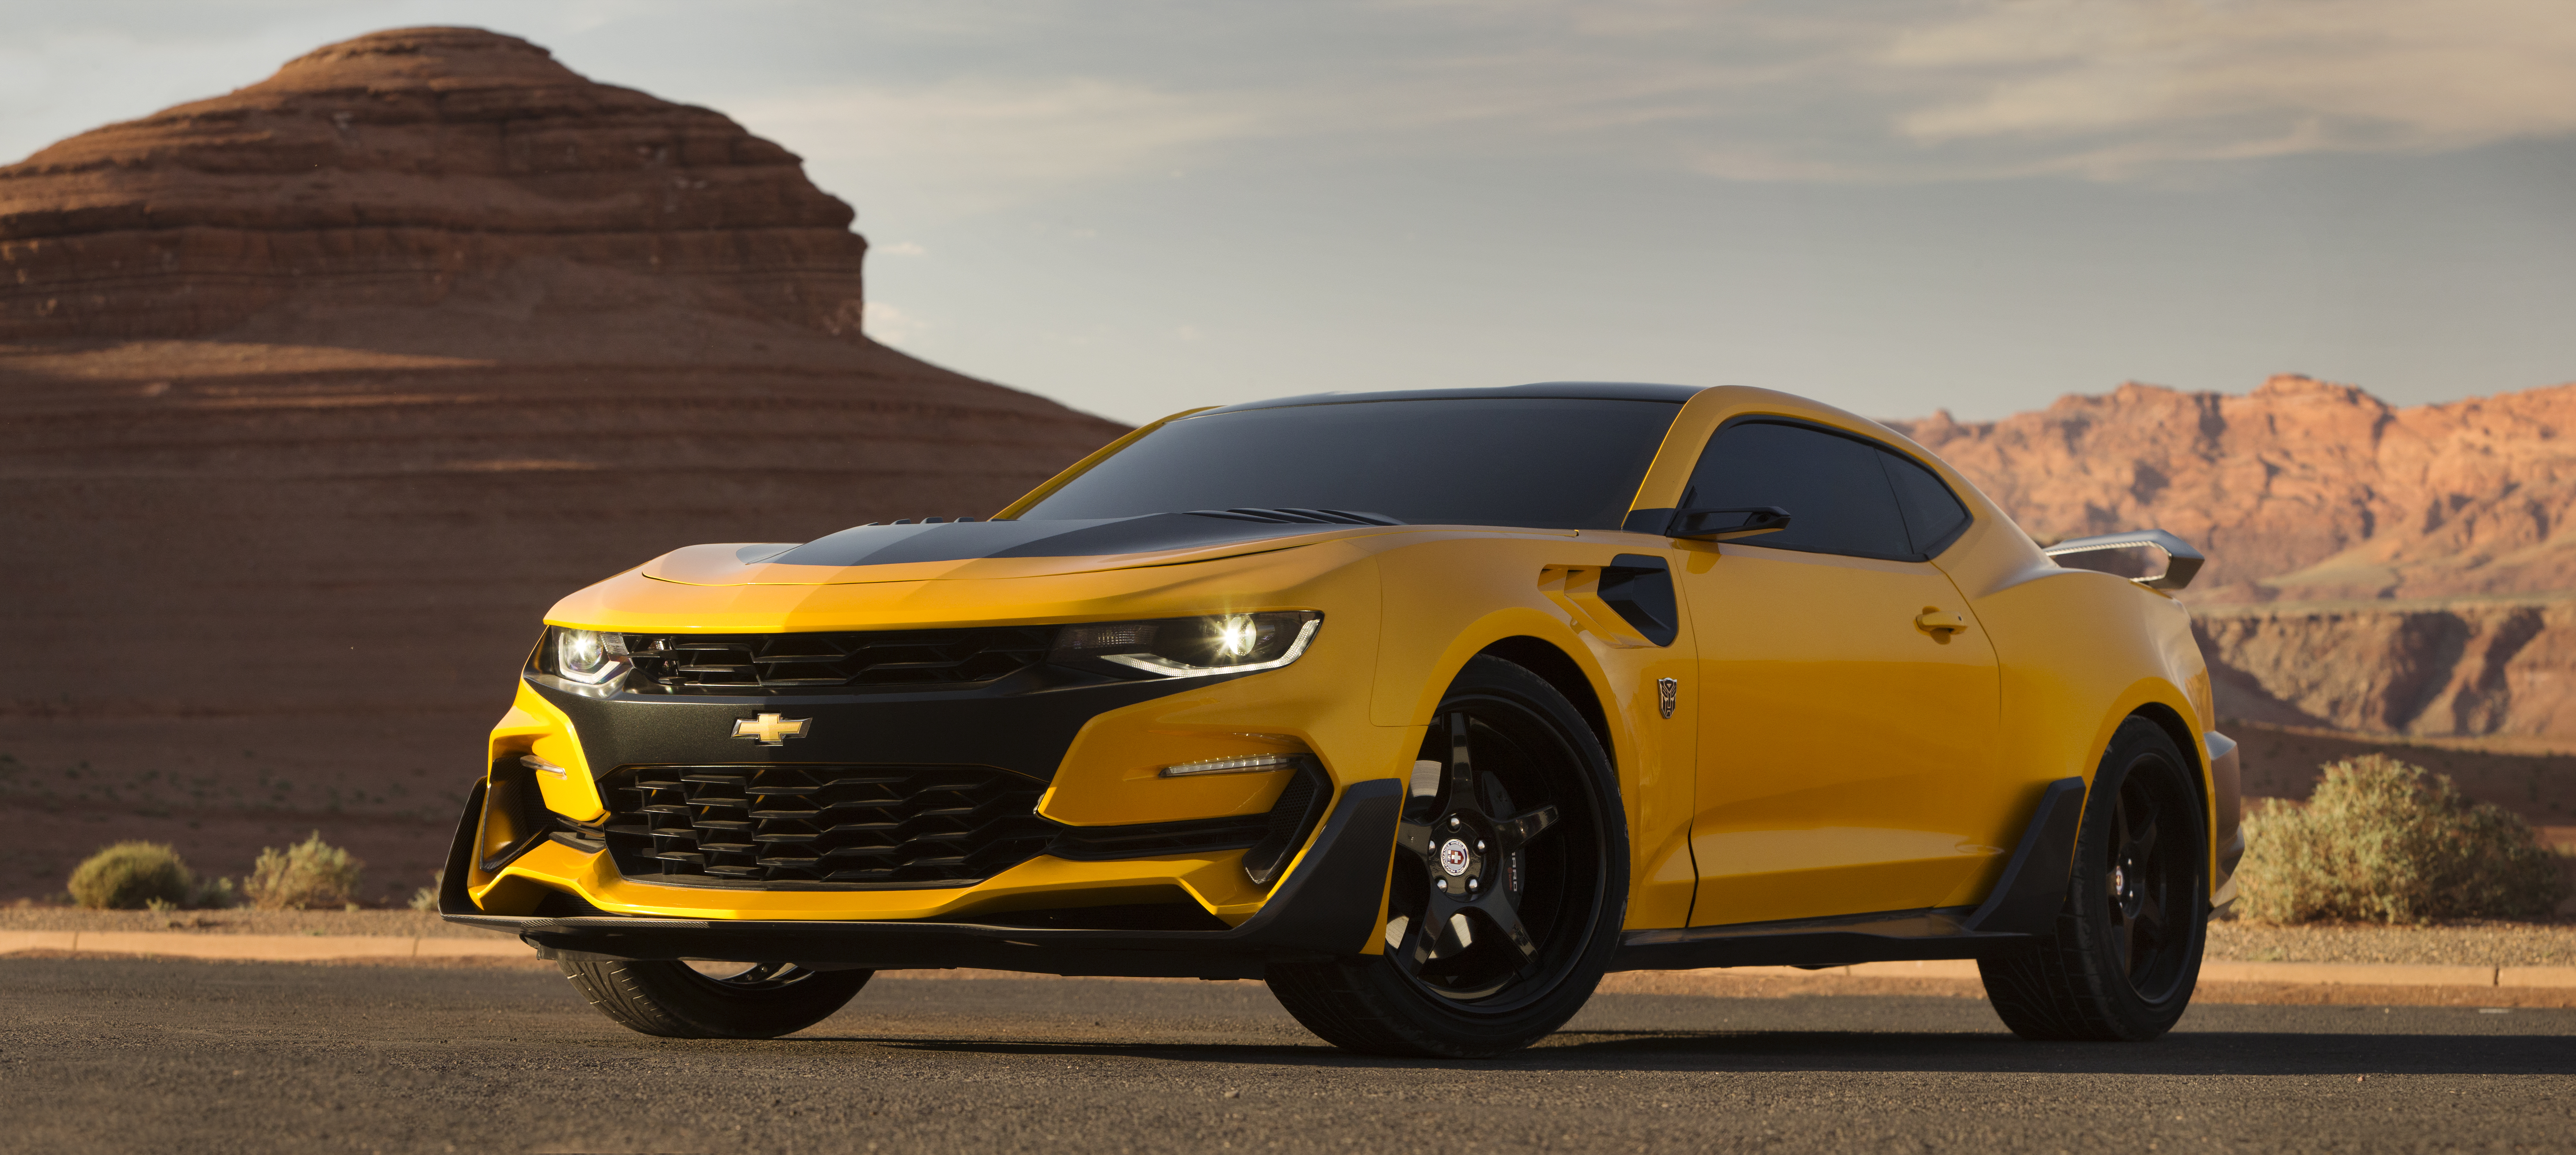 General 7789x3491 car vehicle Chevrolet Camaro yellow cars Chevrolet frontal view headlights sky clouds muscle cars American cars